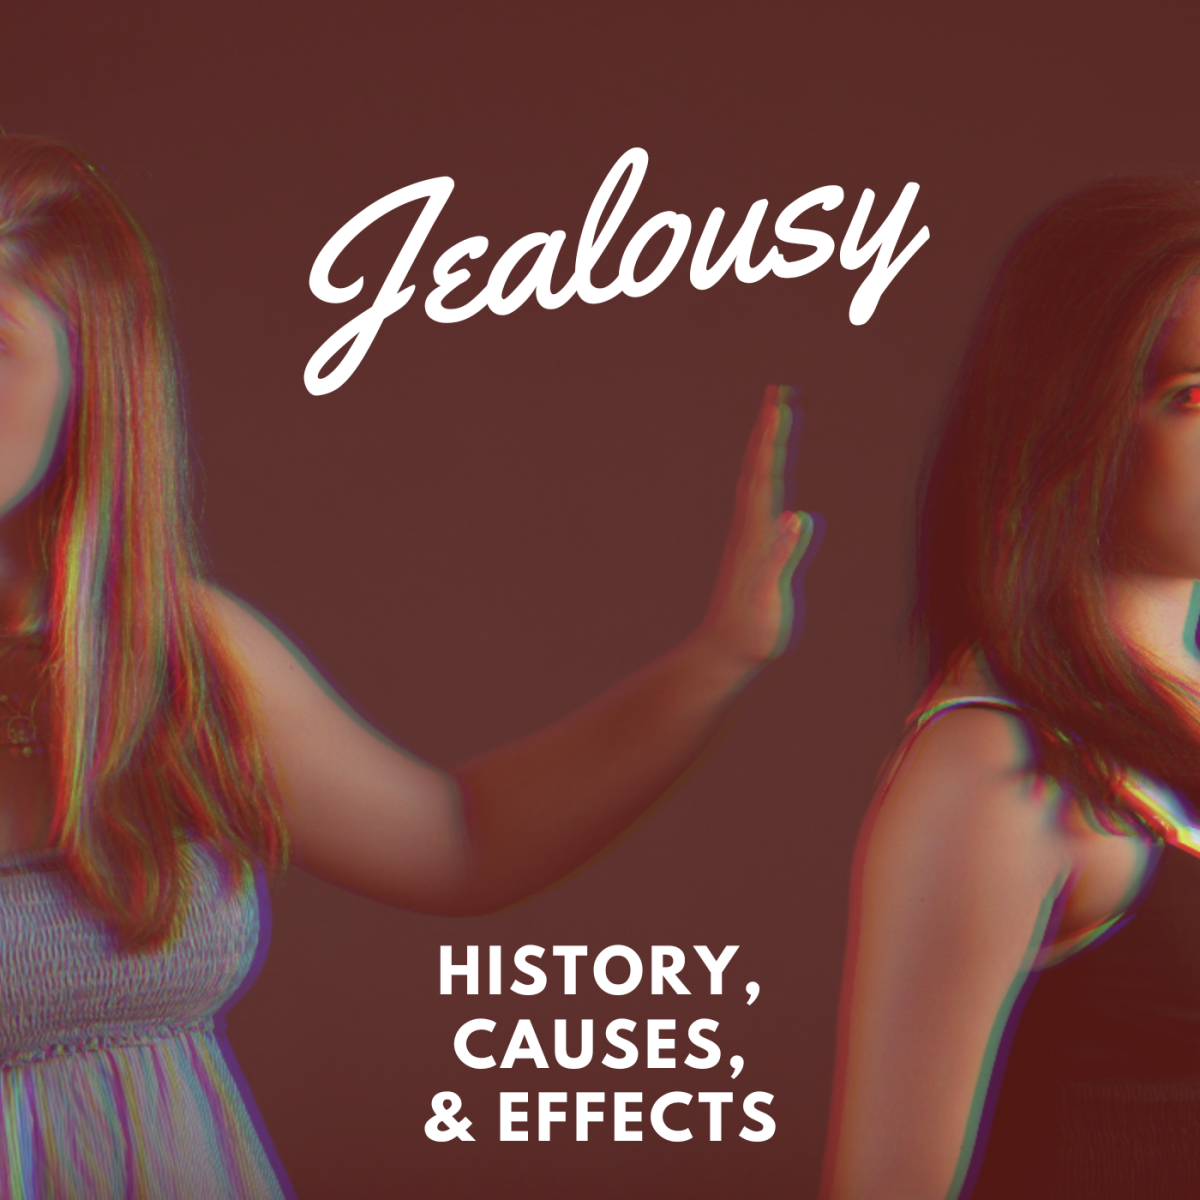 The Causes and Effects of Jealousy